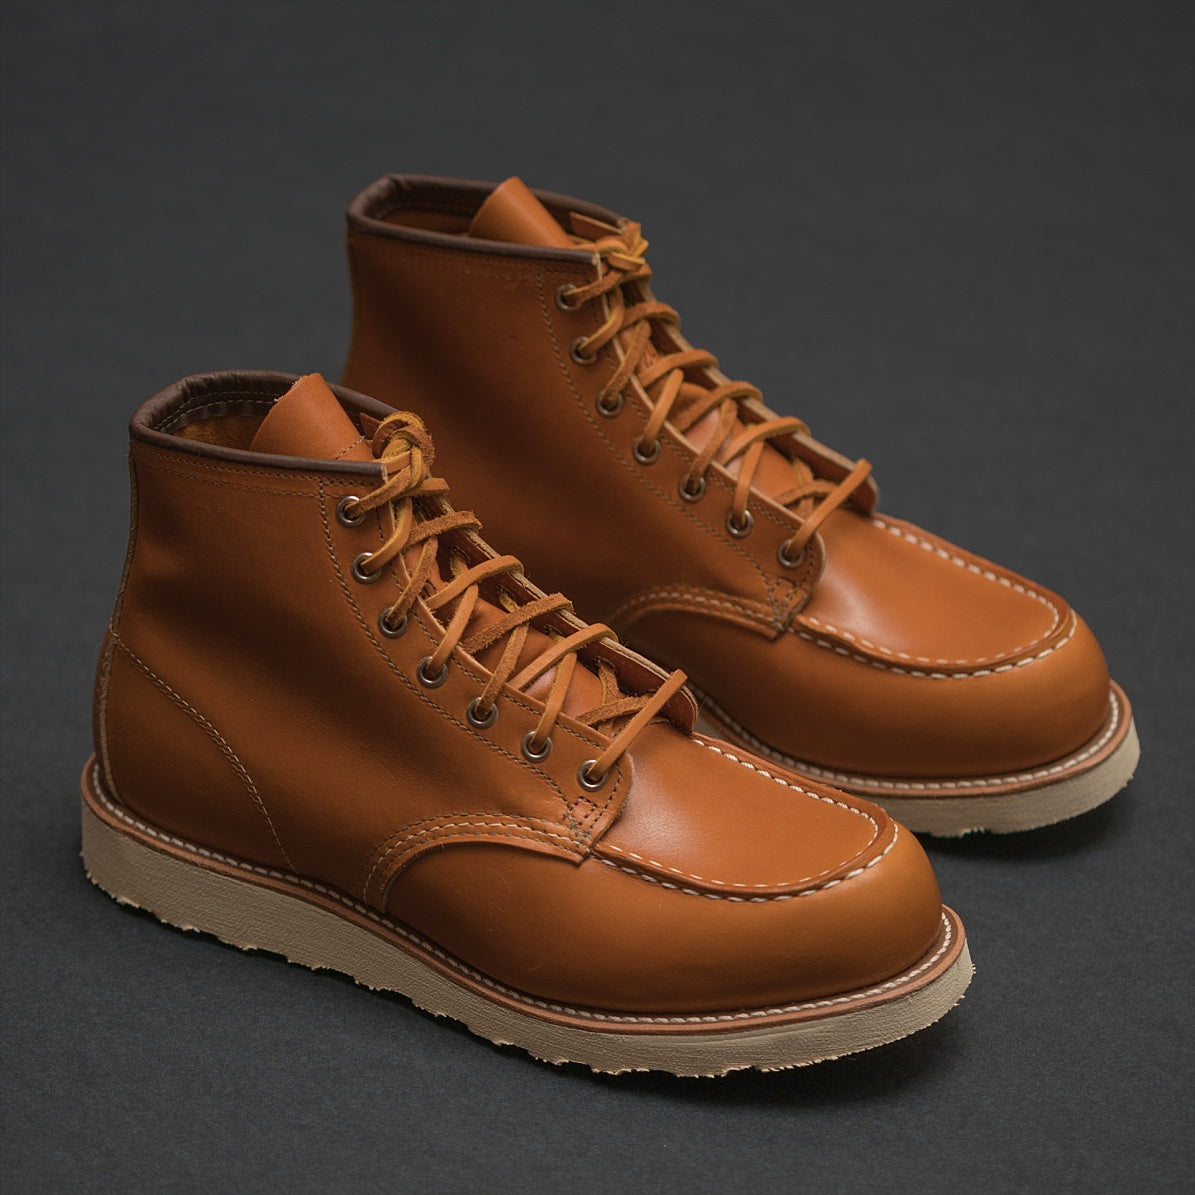 Limited Edition Irish Setter Boots by 